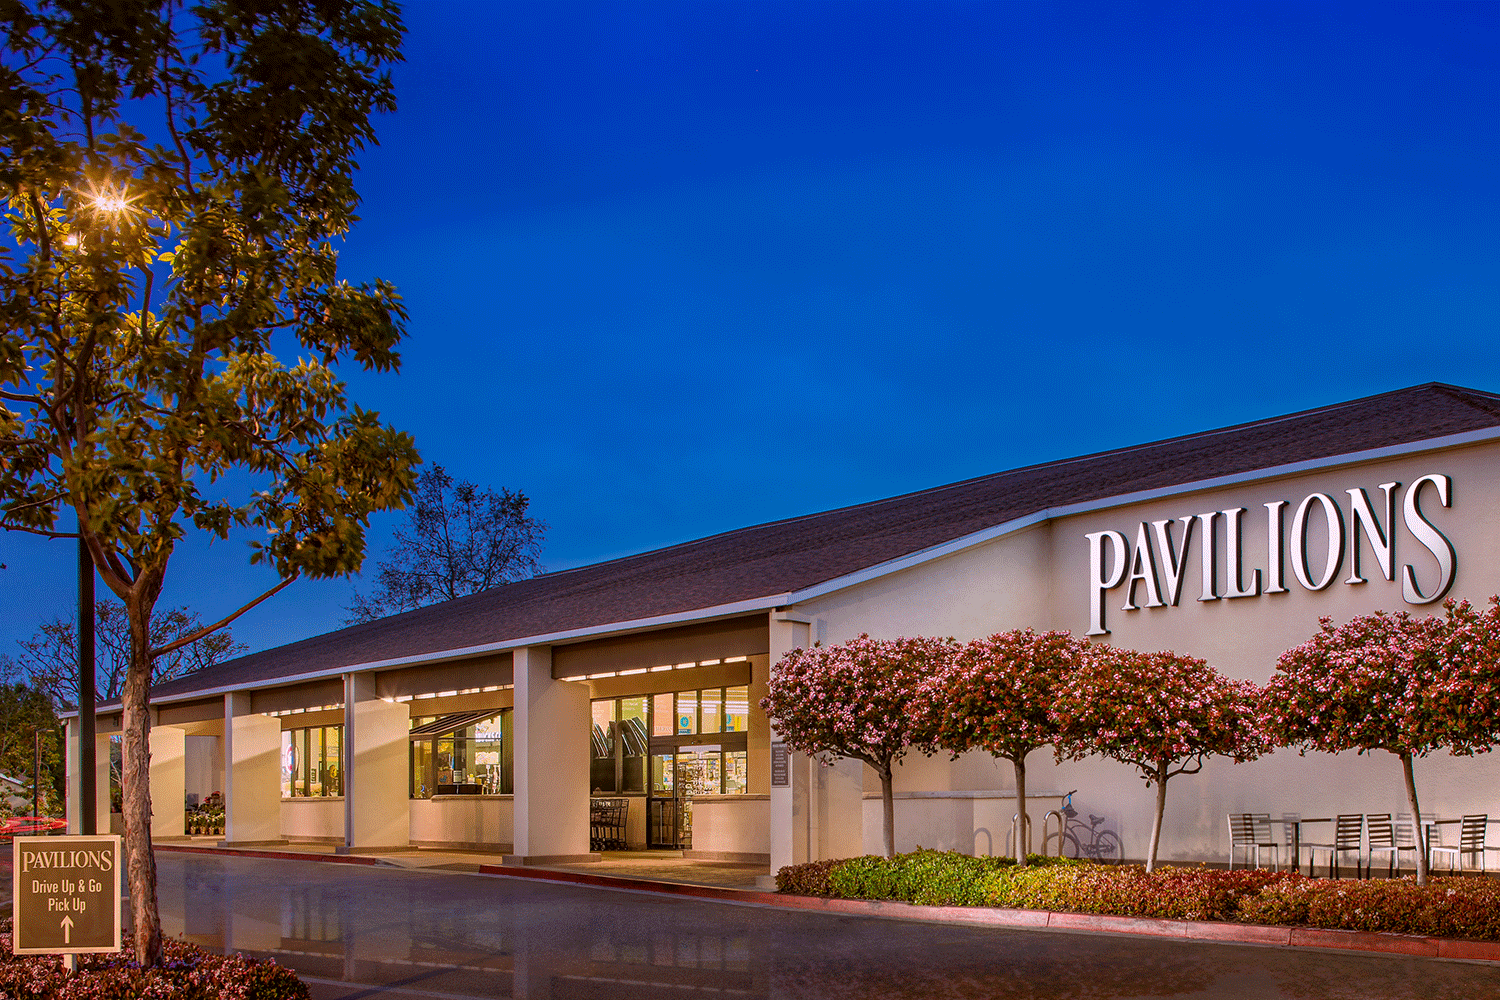  View of Pavilions at dusk in Newport Hills Shopping Center